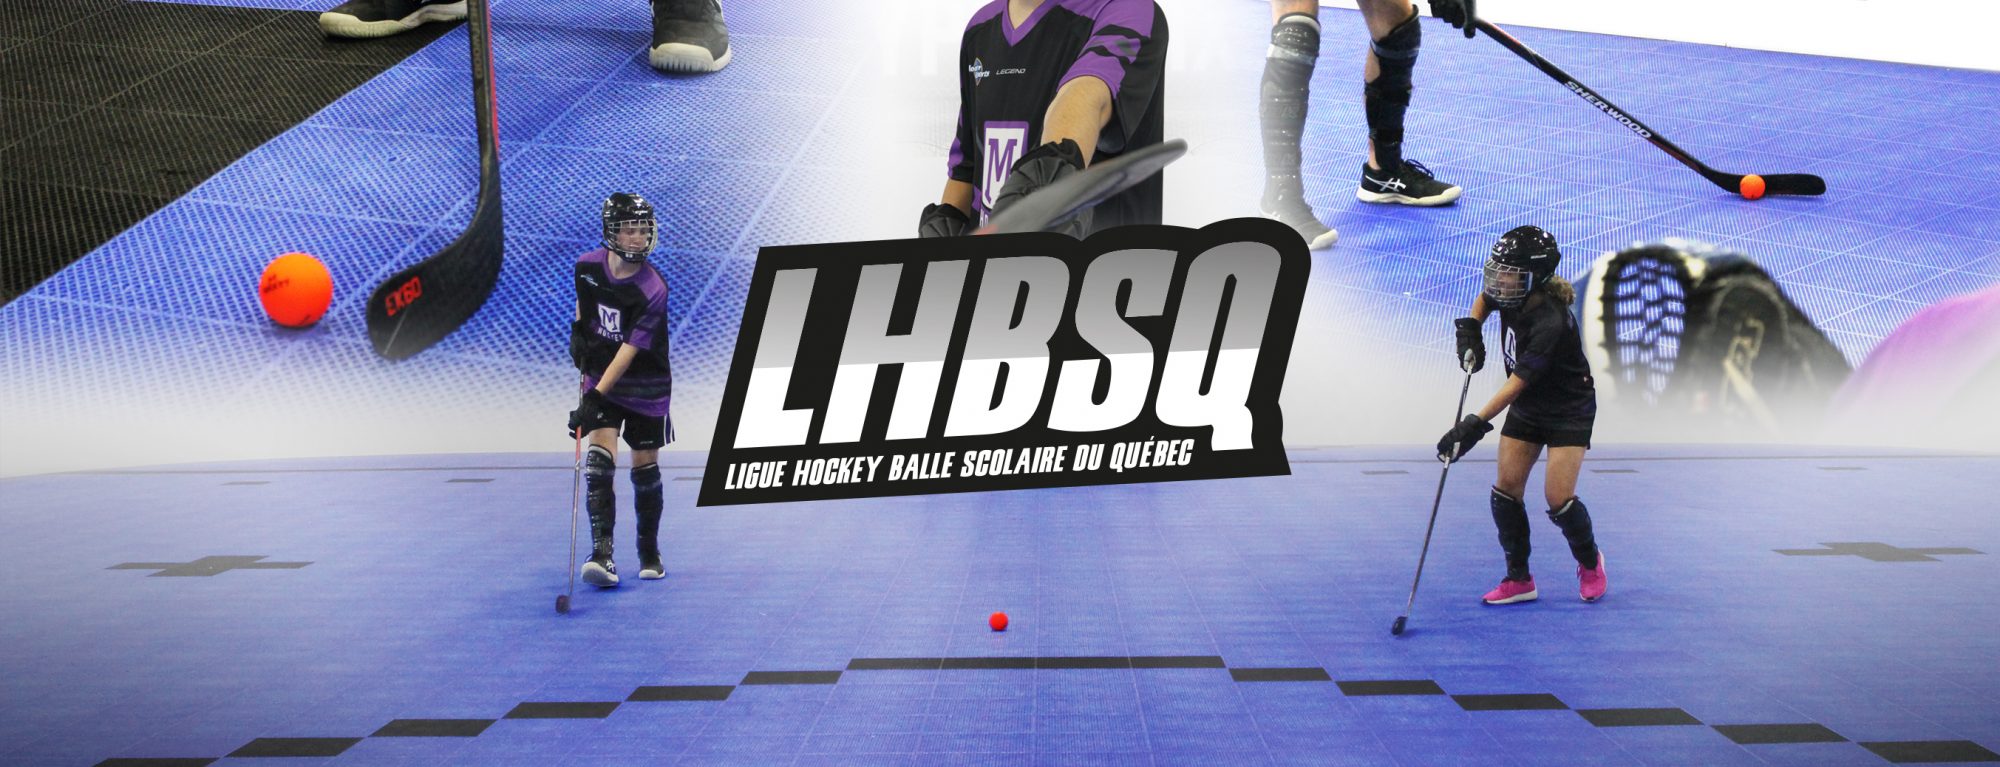 Logo LHBSQ - Page Couverture